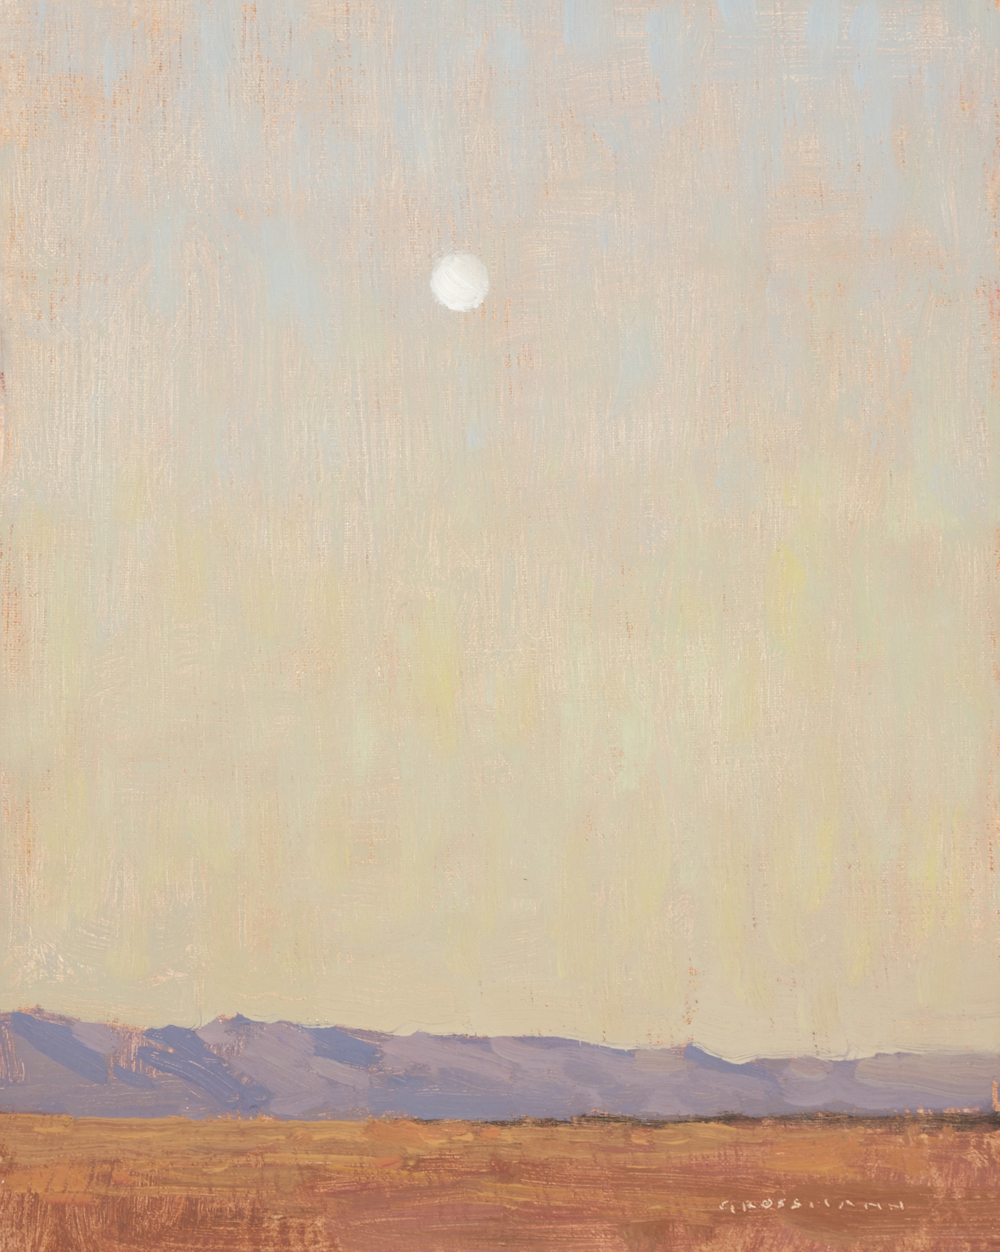 DG16-04 "Moon and Early Morning Sky" 10"x8" O-LP $990F WEB